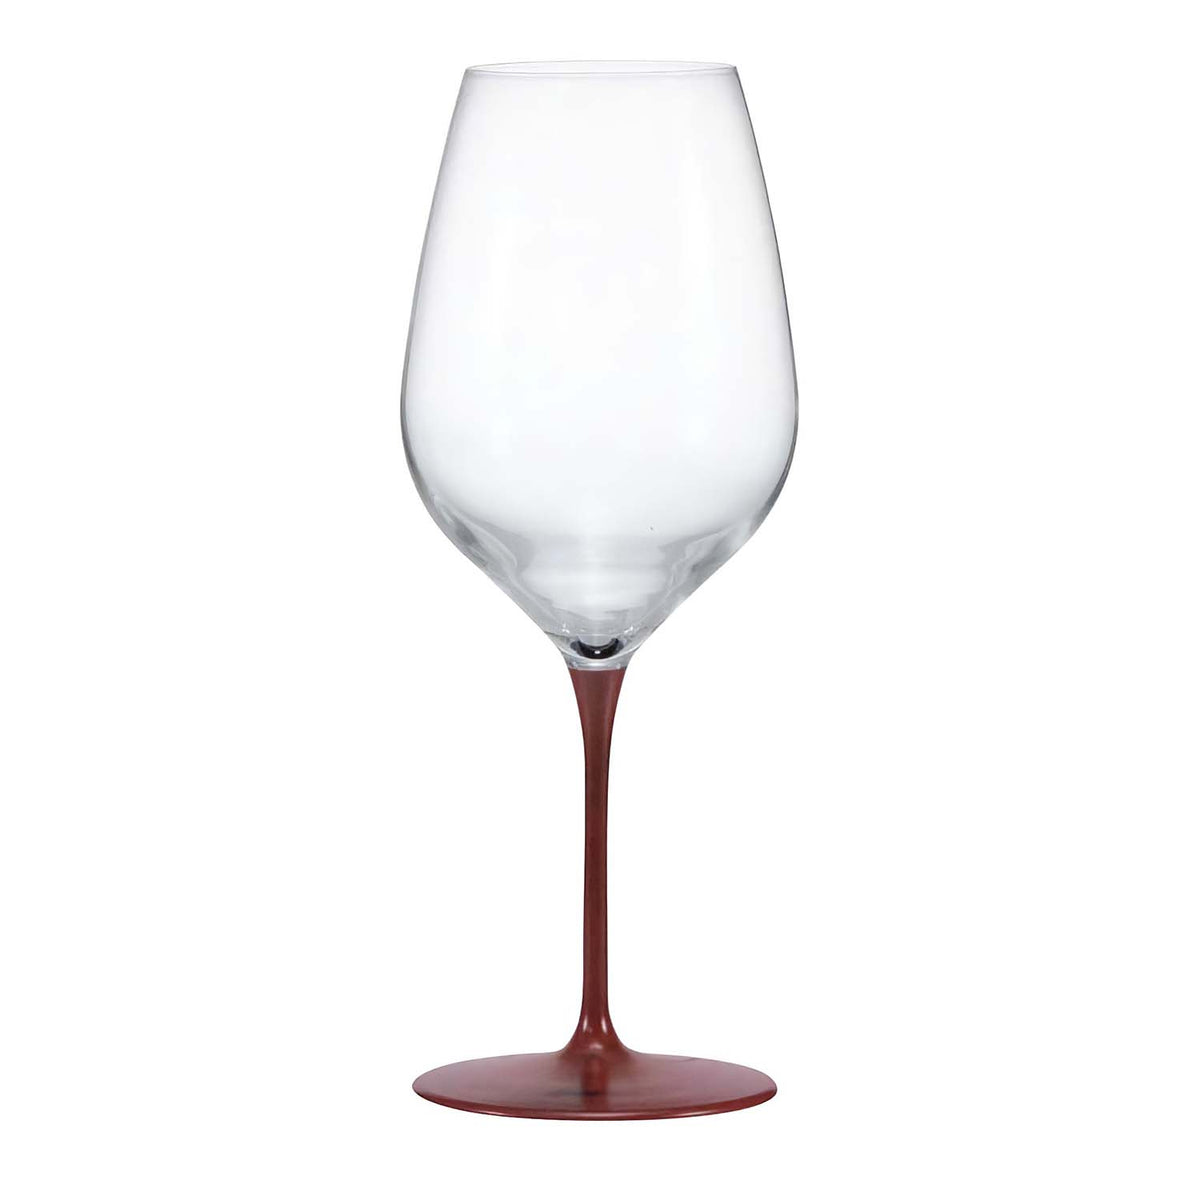 EBM Crystal Glass Lacquered Pair Wine Glass